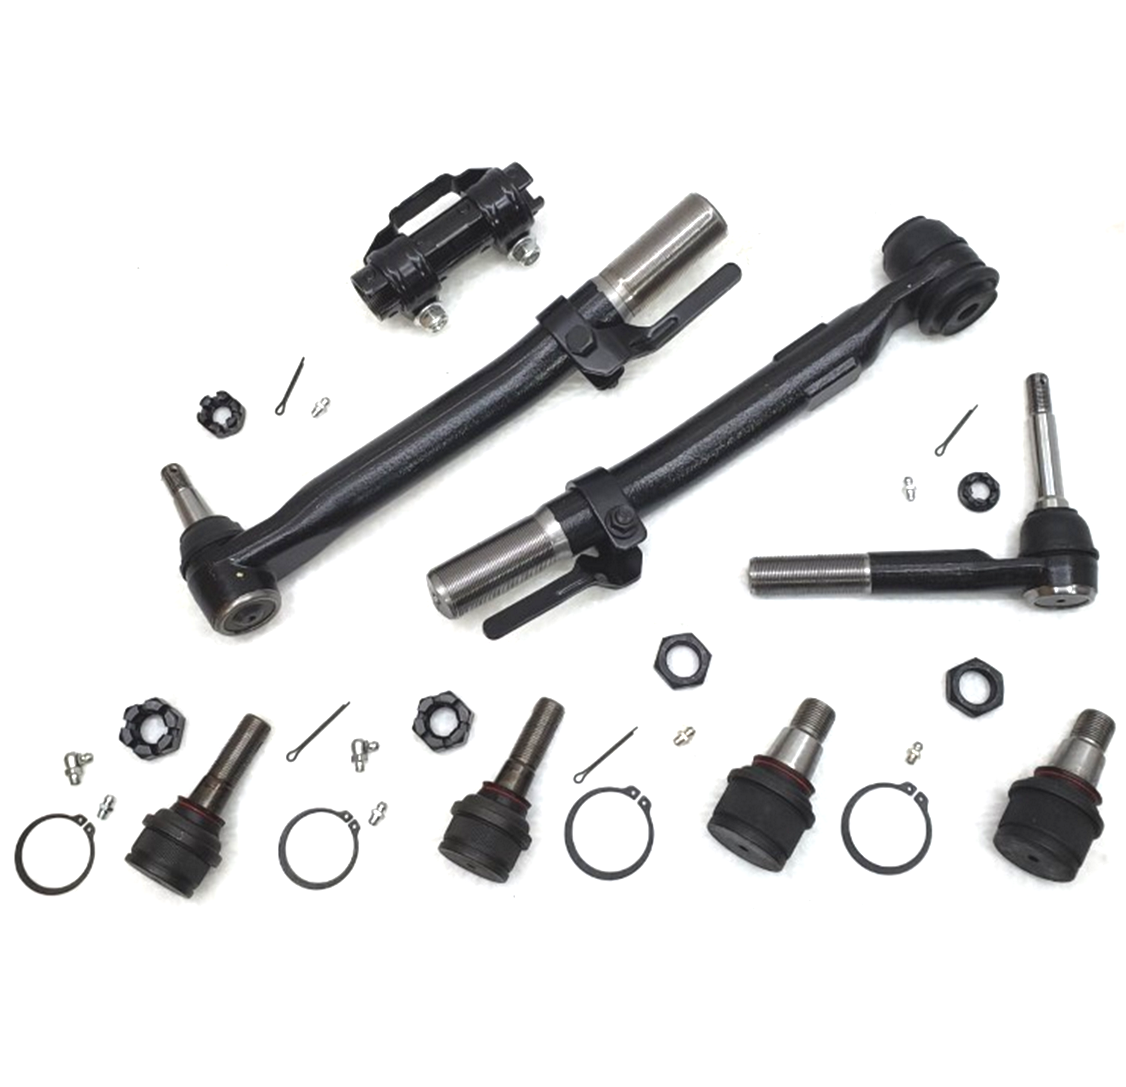 Heavy Duty Select Ball Joint & Tie Rod Kit for 2017-2019 Ford F250, F350 Super Duty 4x4 Wide Frame